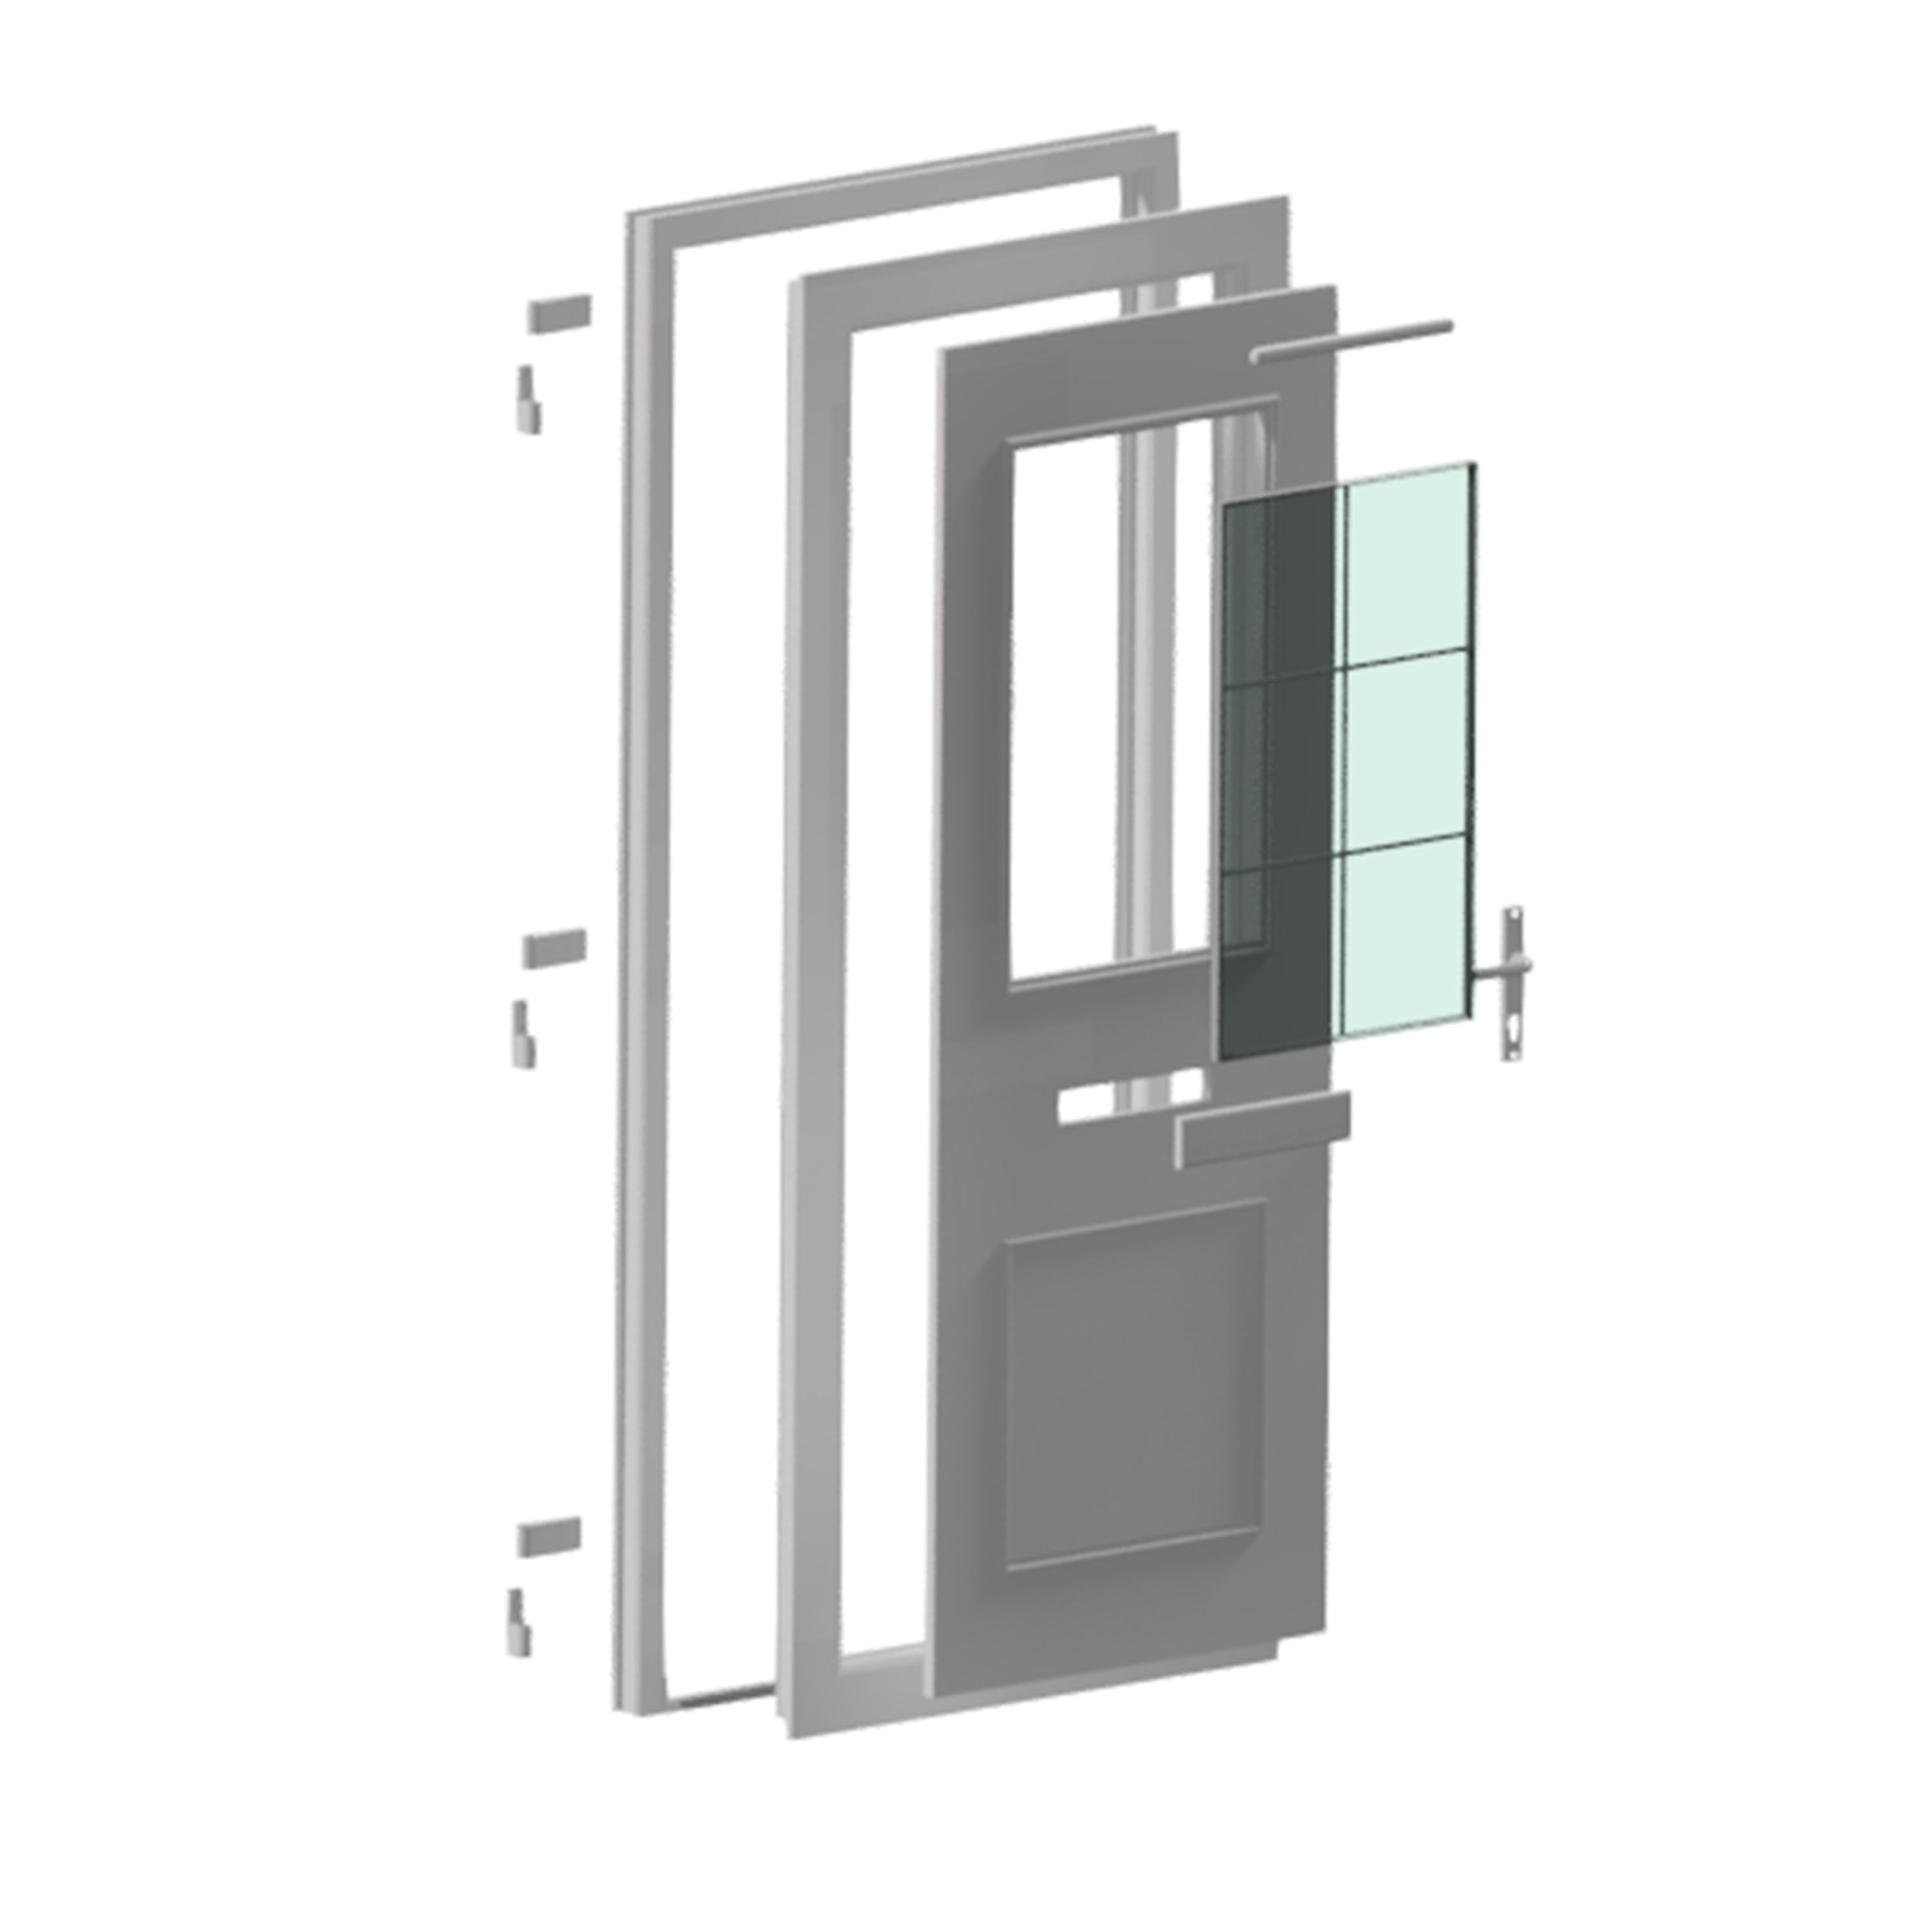 Fortia Mindil Clear Glazed White LH External Front Door set, (H)2085mm (W)920mm